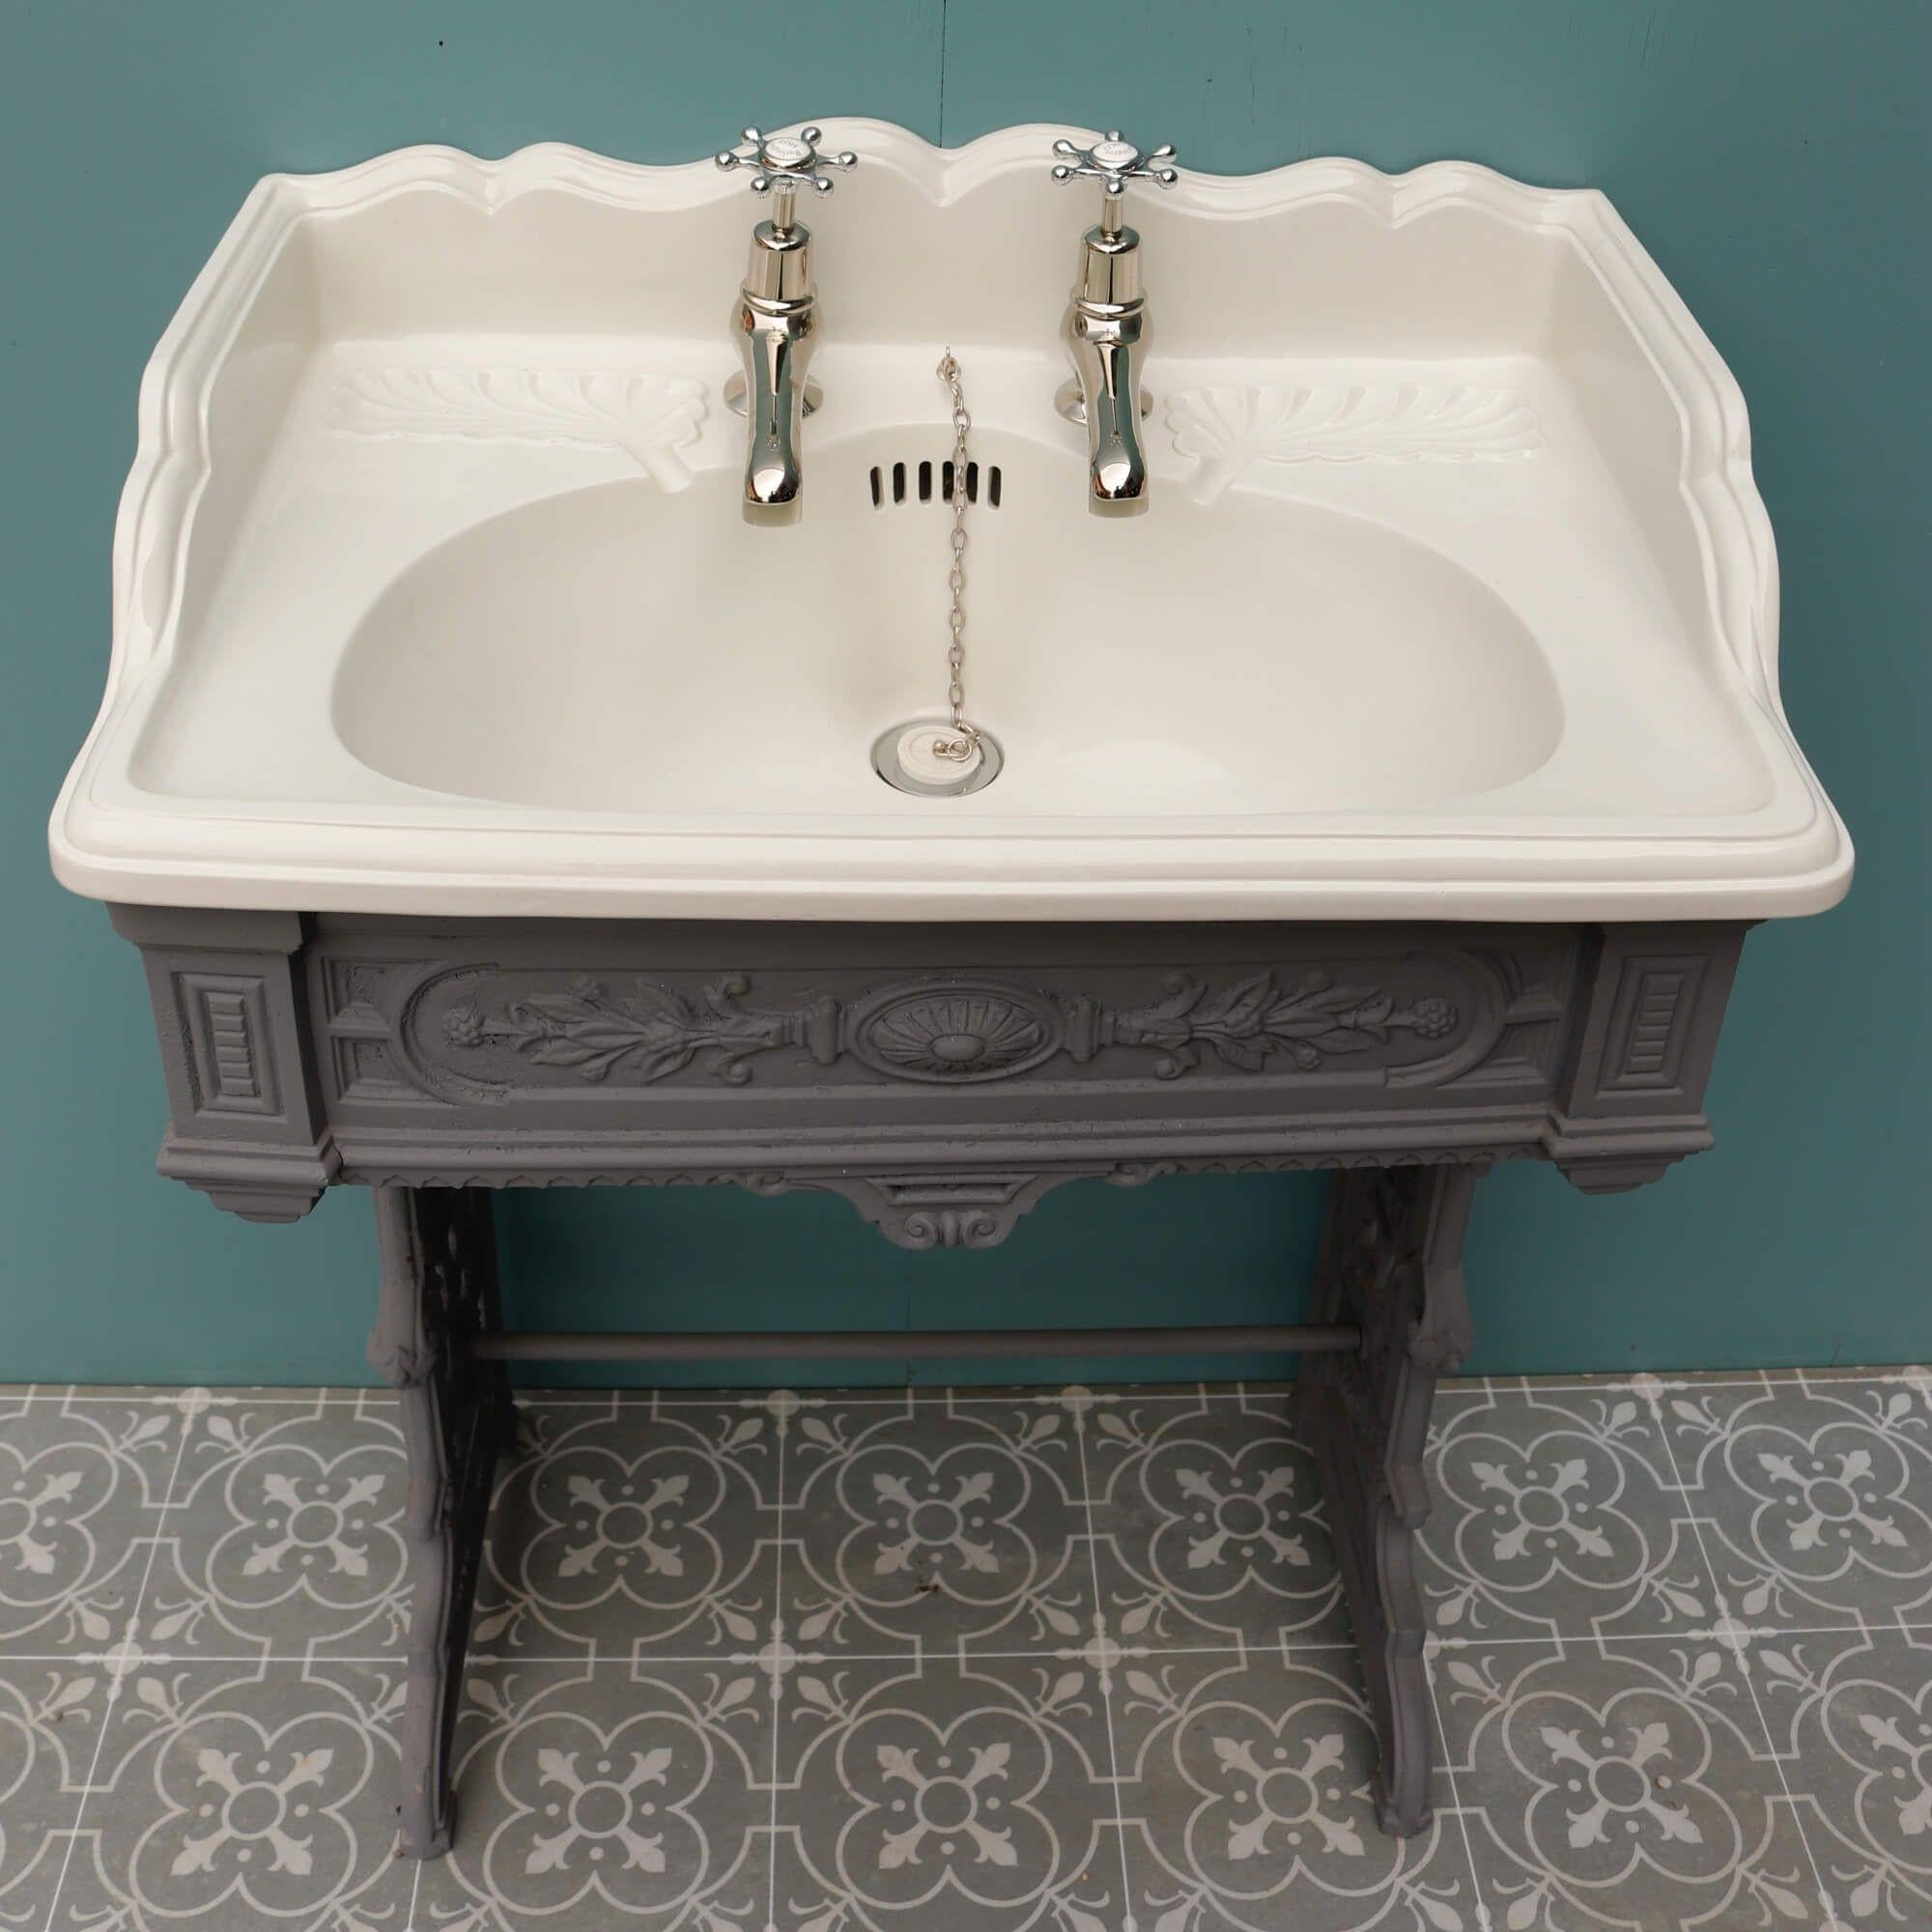 Antique Porcelain Sink Basin with Cast Iron Stand In Fair Condition For Sale In Wormelow, Herefordshire